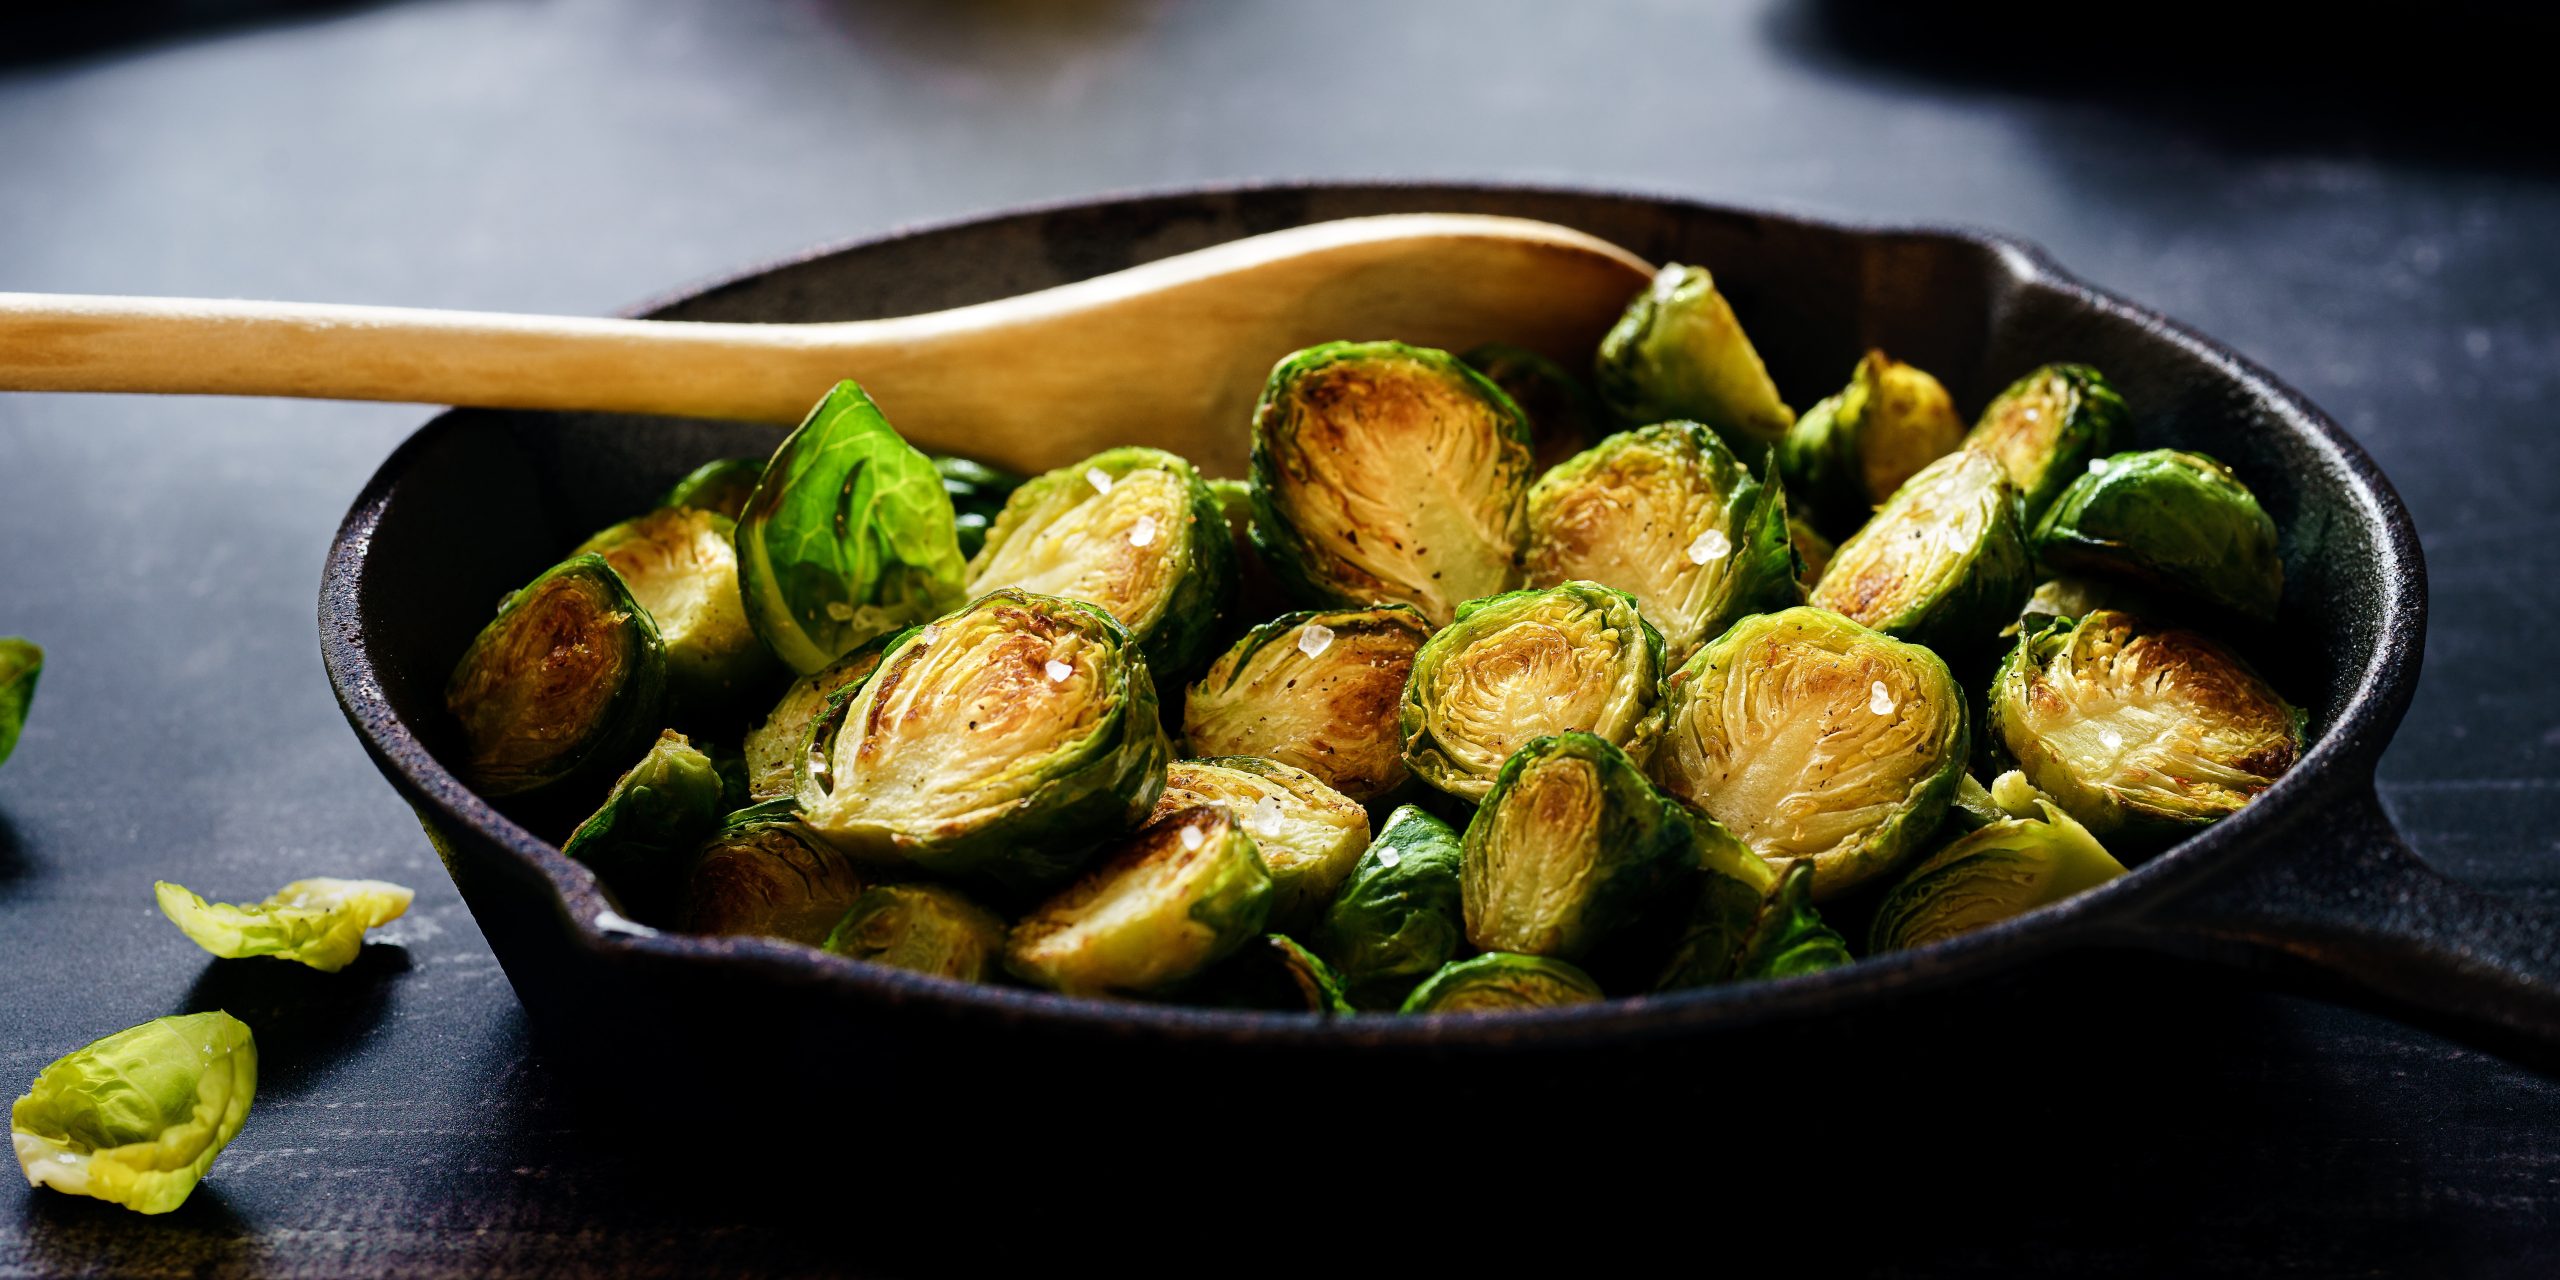 local-brussels-sprouts